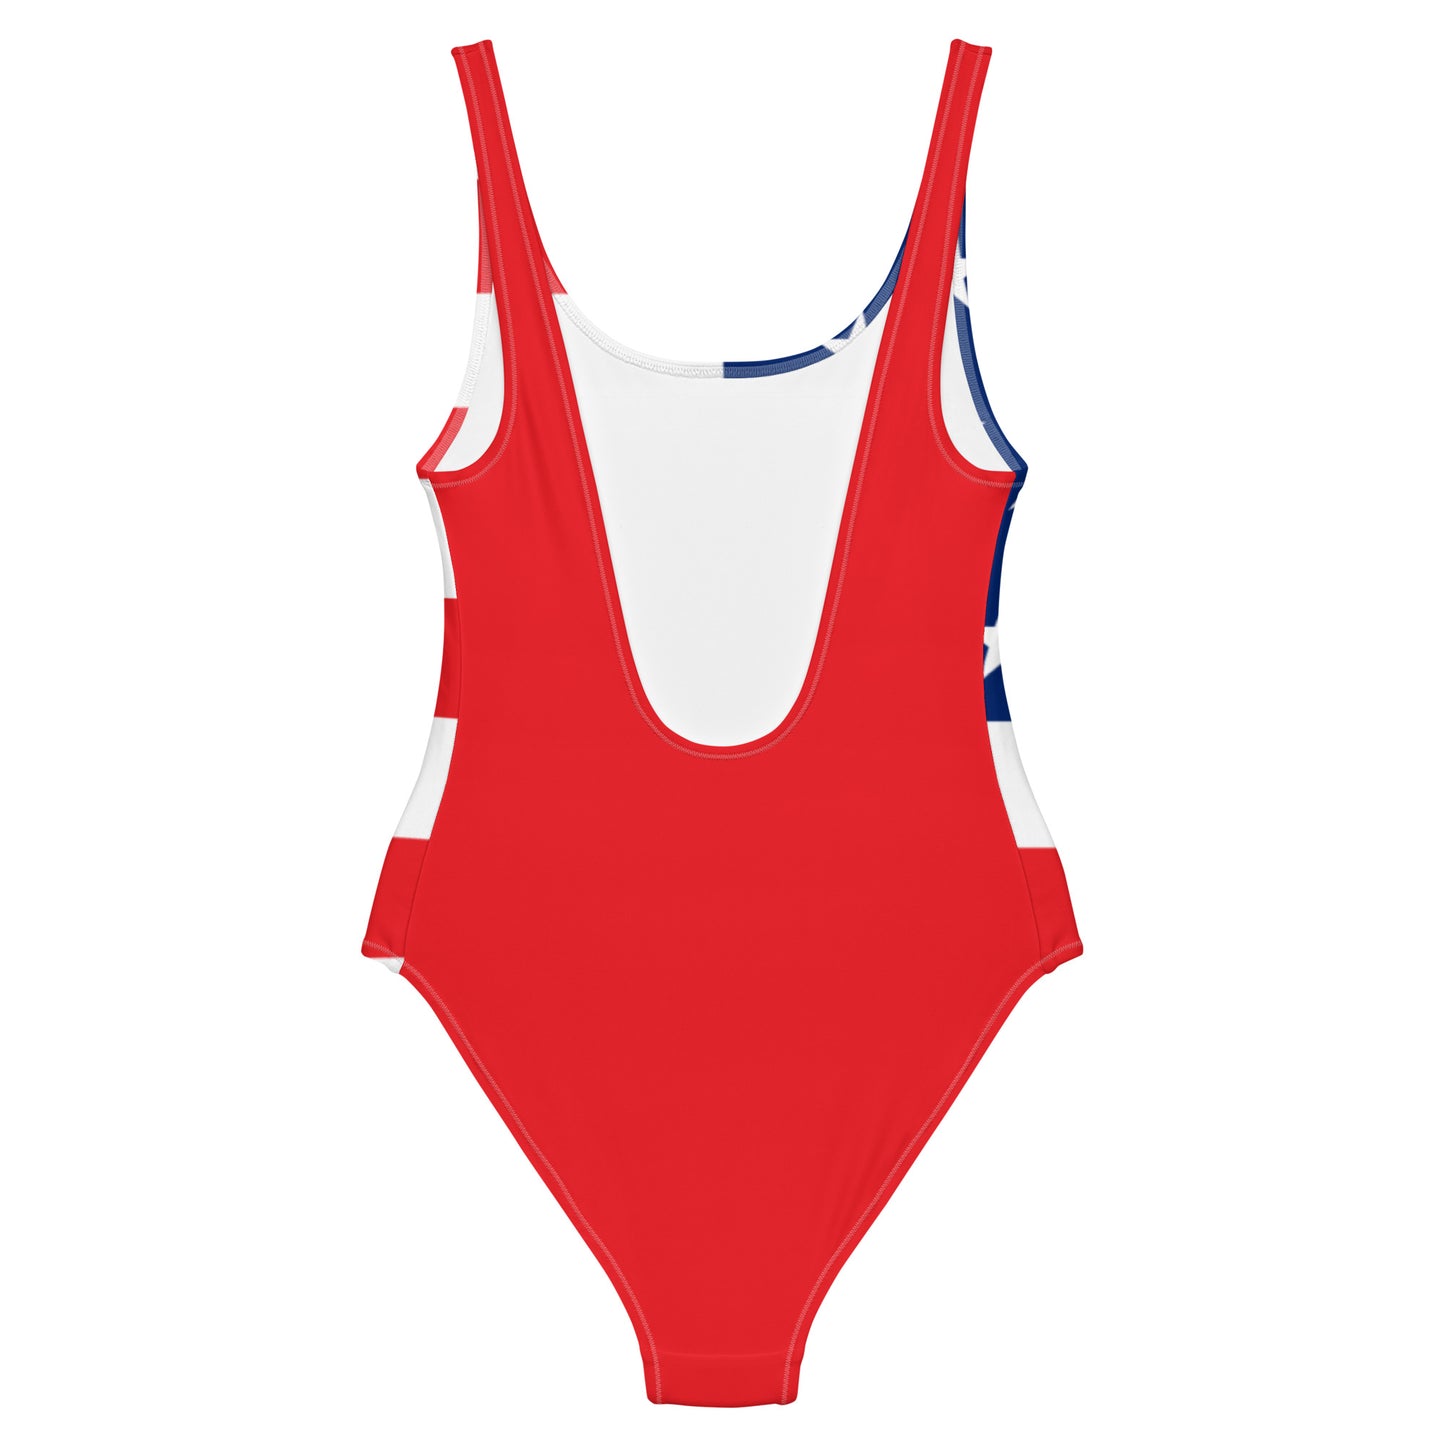 U.S.A Flag - Sustainably Made One-Piece Swimsuit